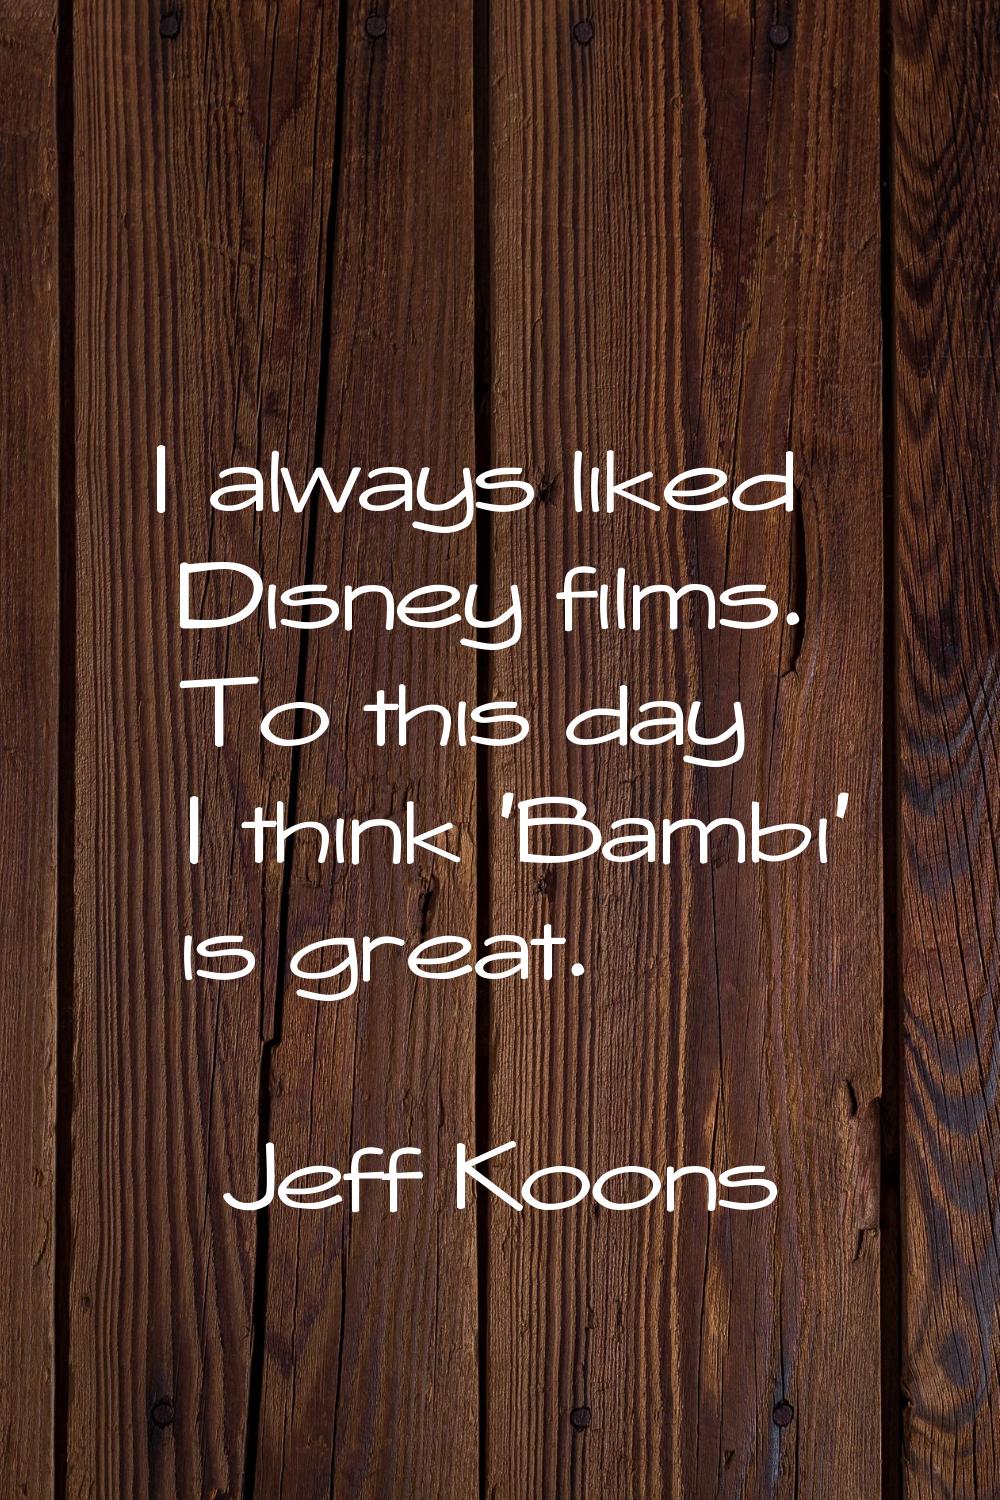 I always liked Disney films. To this day I think 'Bambi' is great.